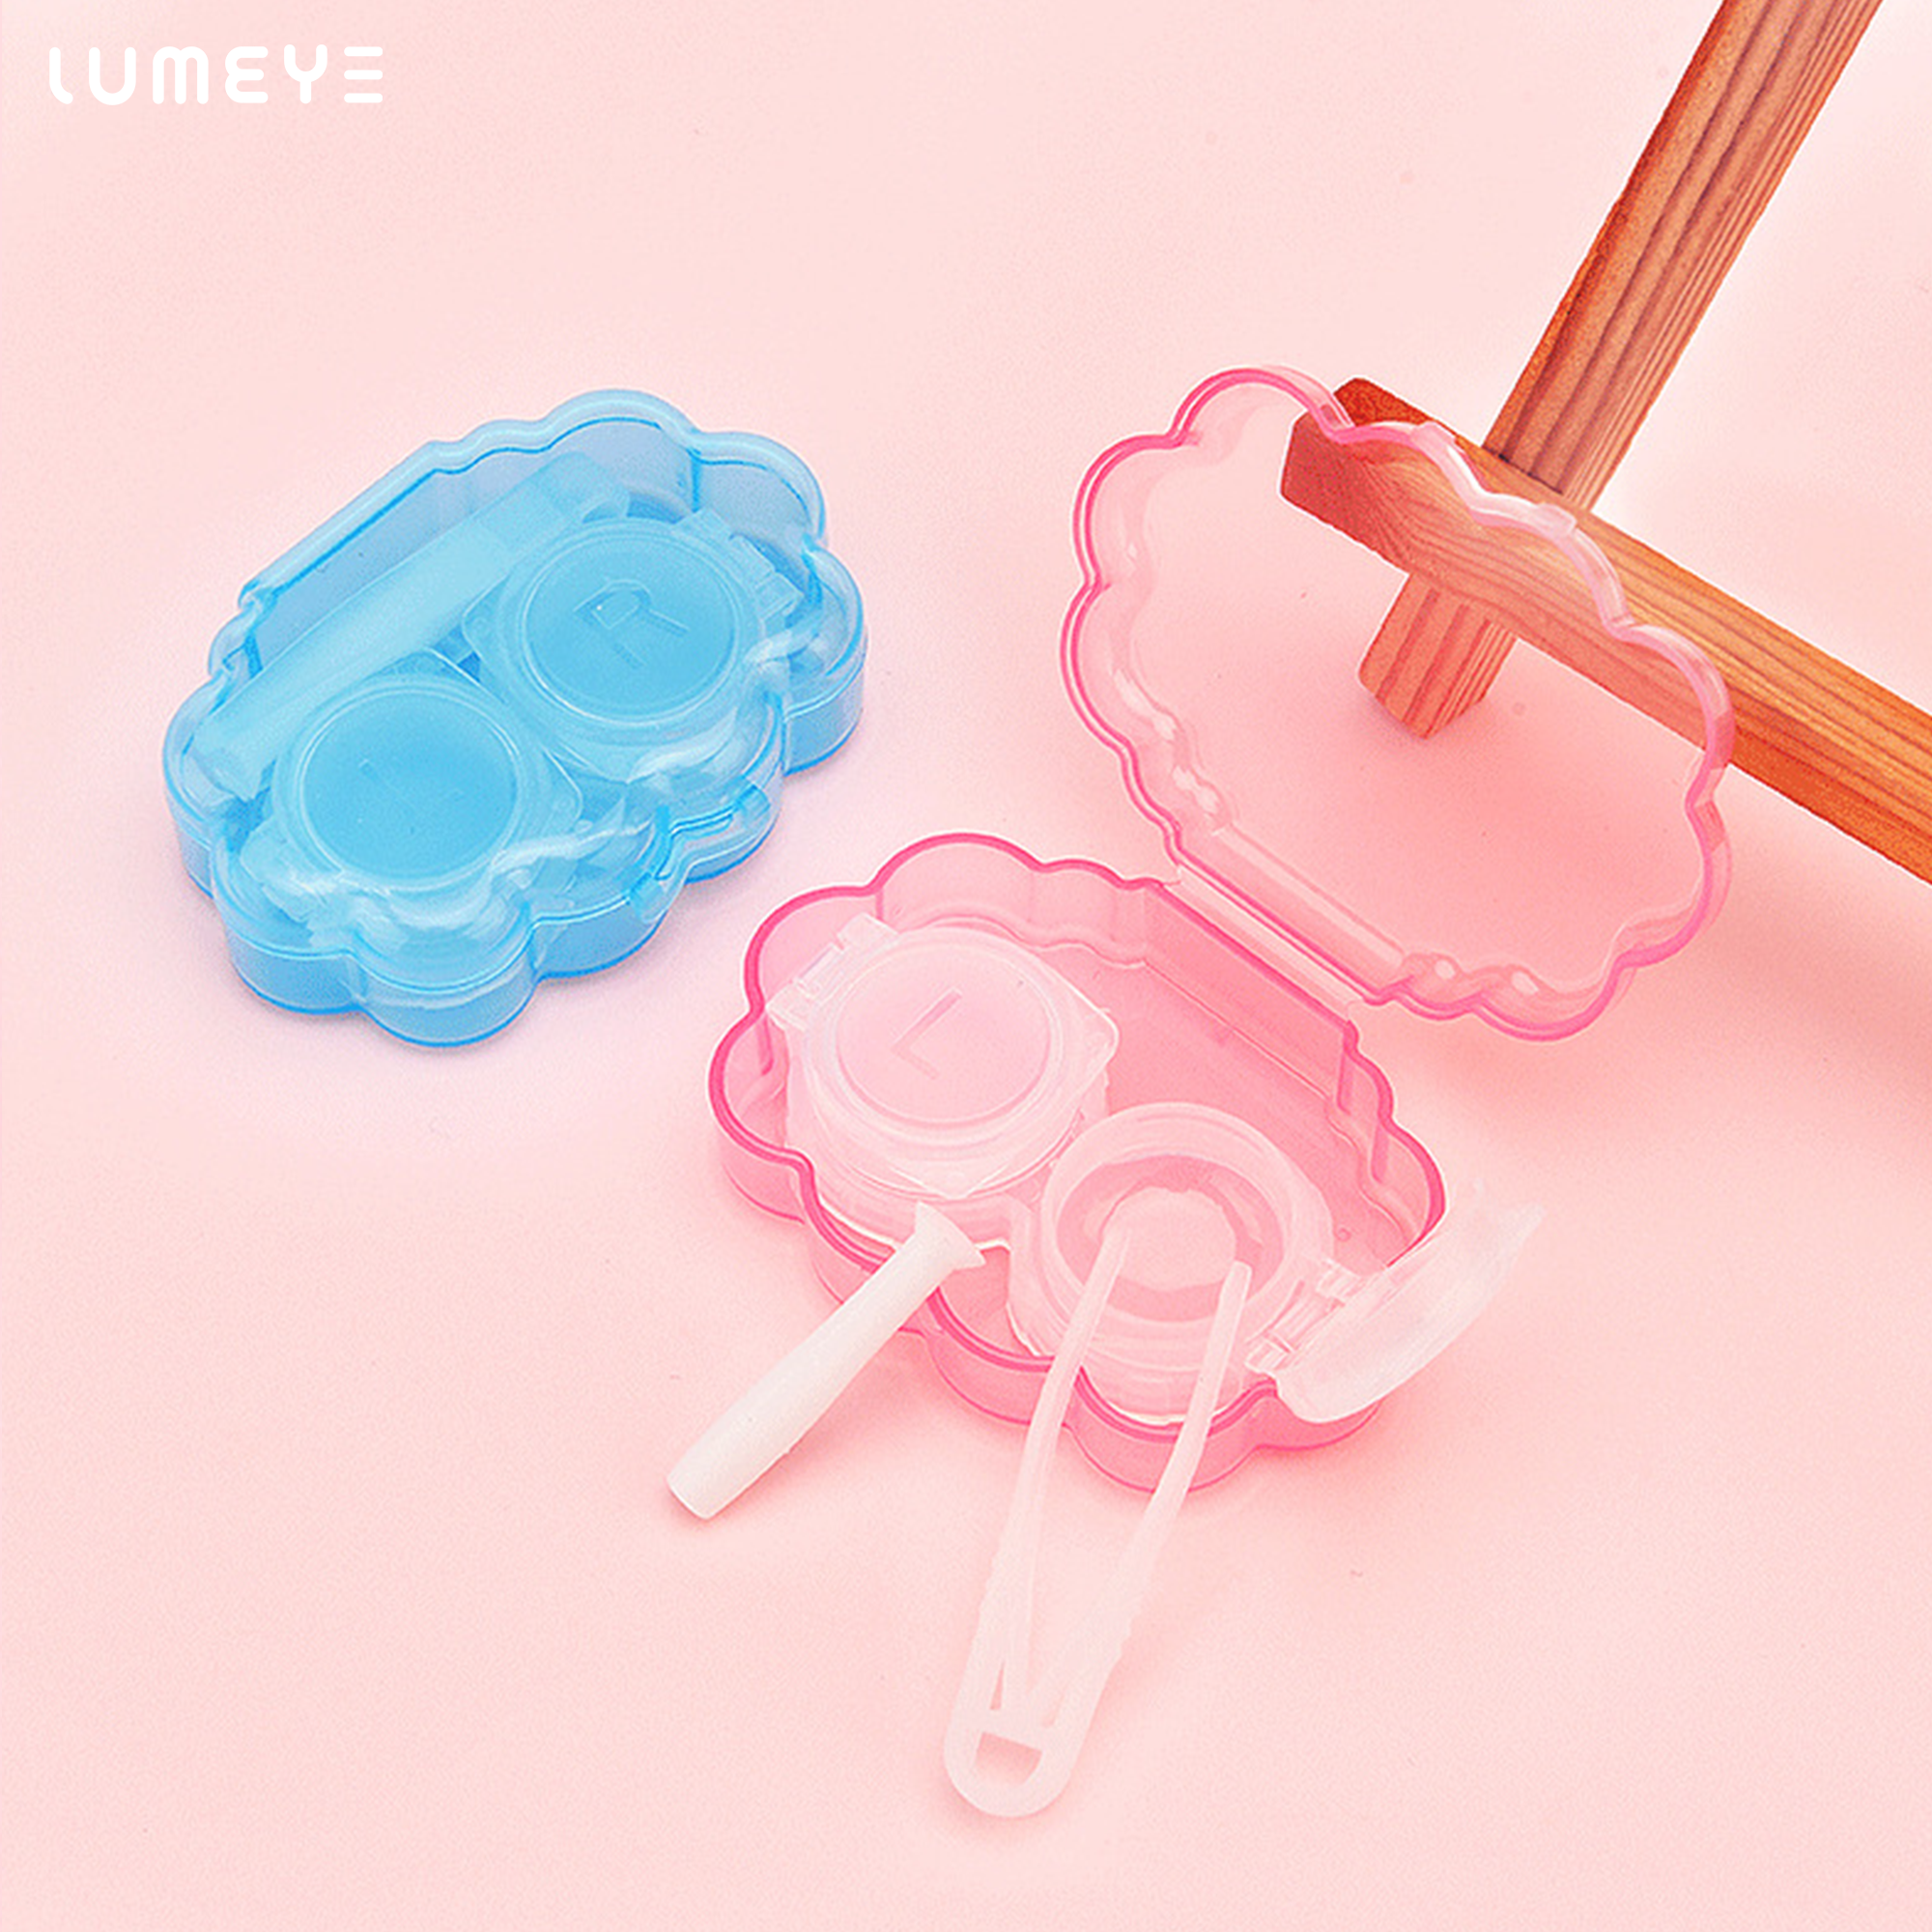 Best COLORED CONTACTS - LUMEYE Lovely Cloud Lens Case - LUMEYE